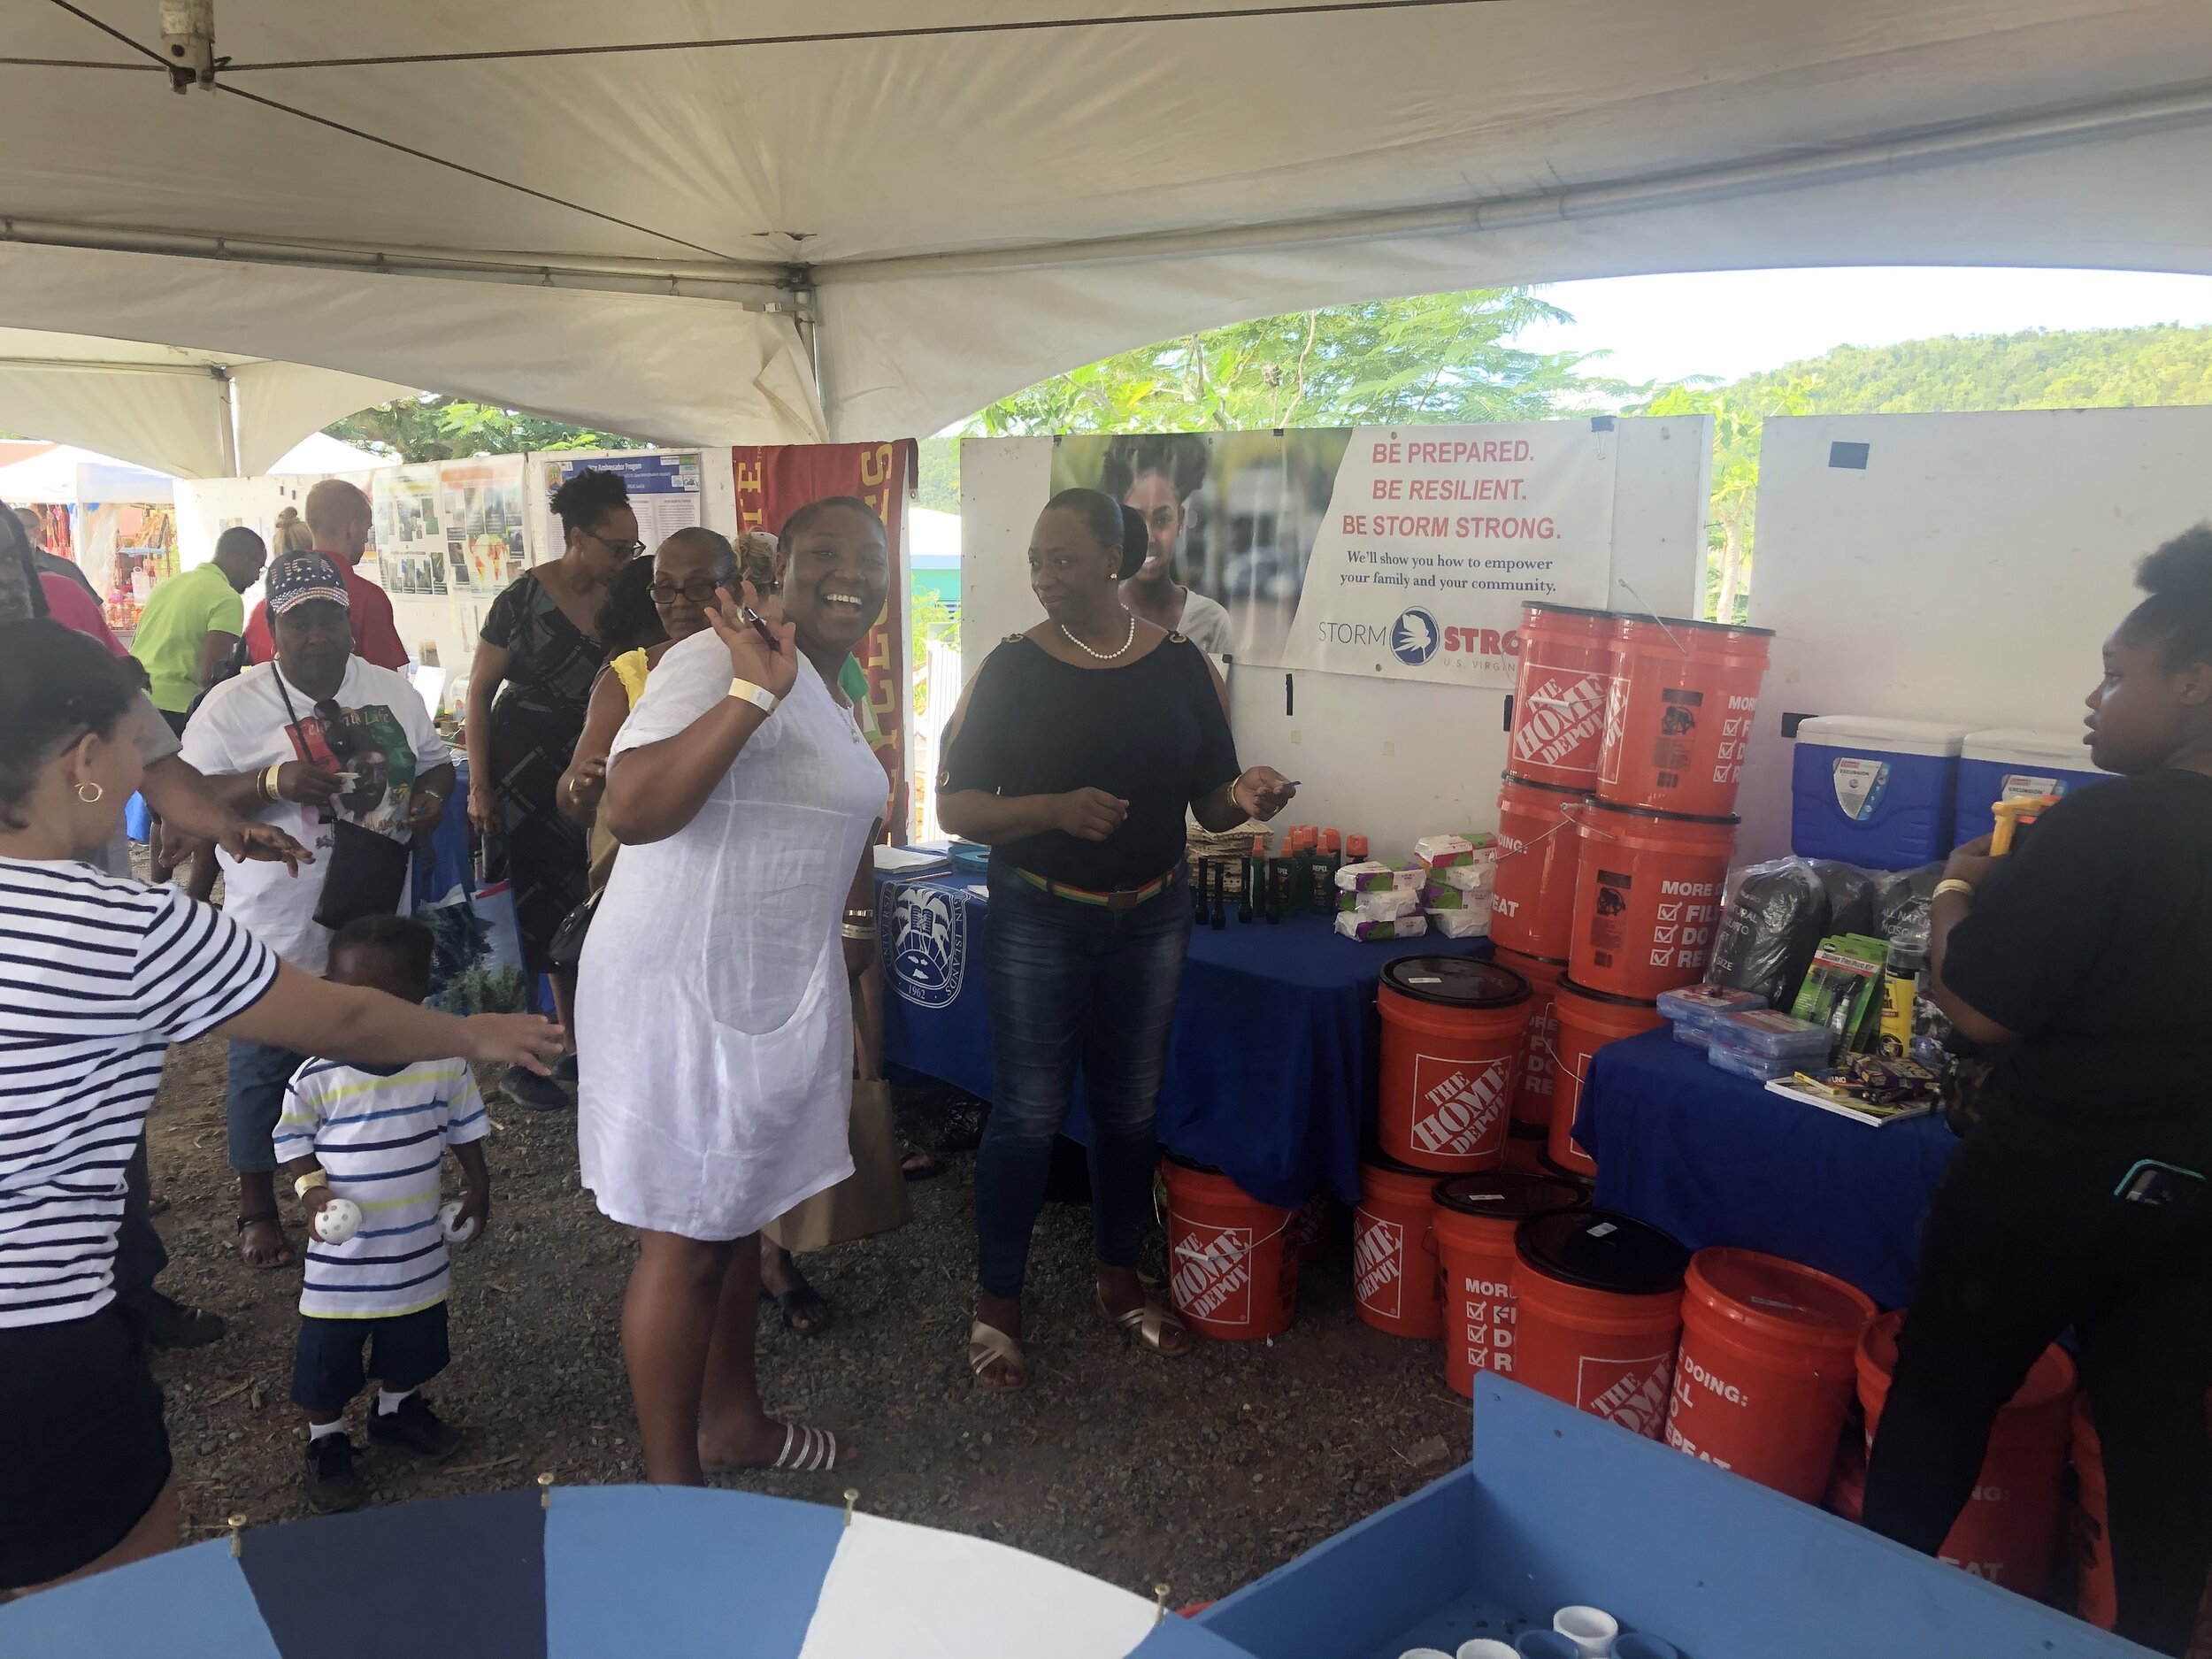  USVI Storm Strong Program participants Kaylin Wallen and Jessica LaPlace direct community members to play carnival games for the supply distribution CTP at the 2019 St. Thomas &amp; St. John Agricultural Fair. Photo: KW Grimes. 